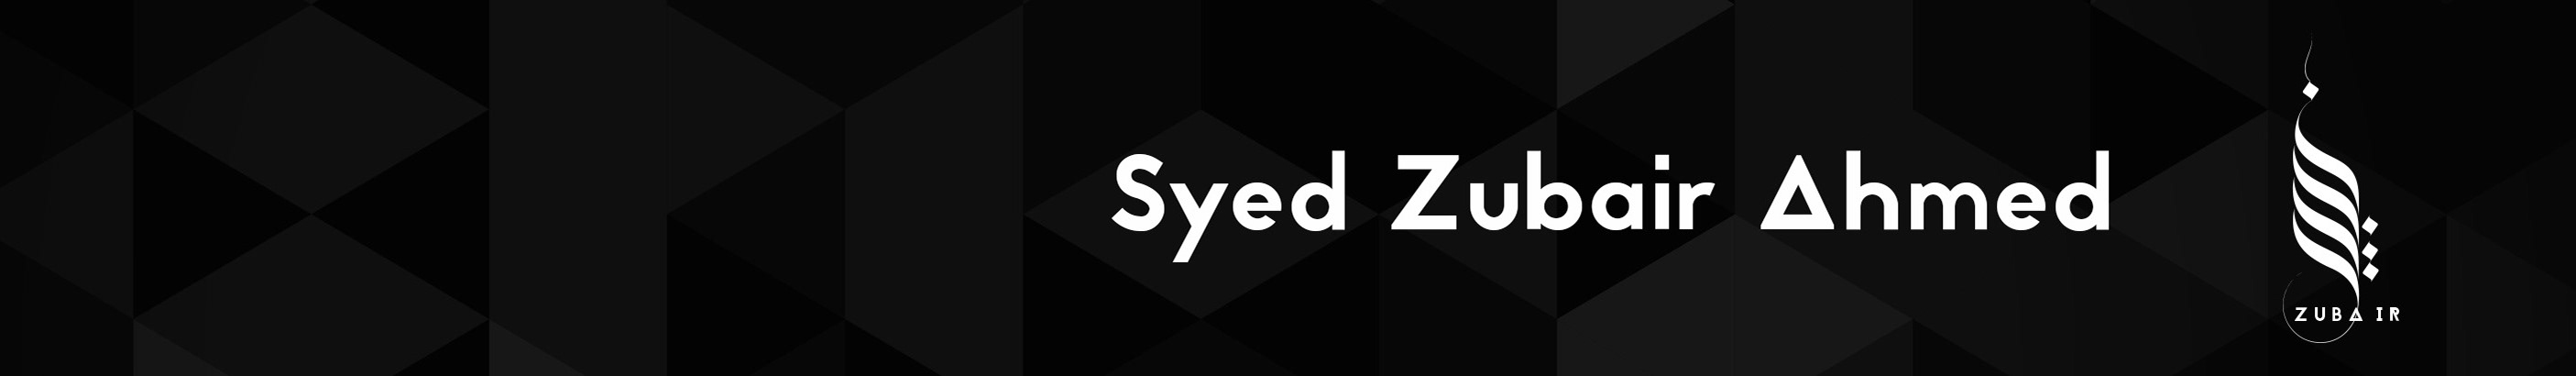 Syed Zubair Ahmed's profile banner